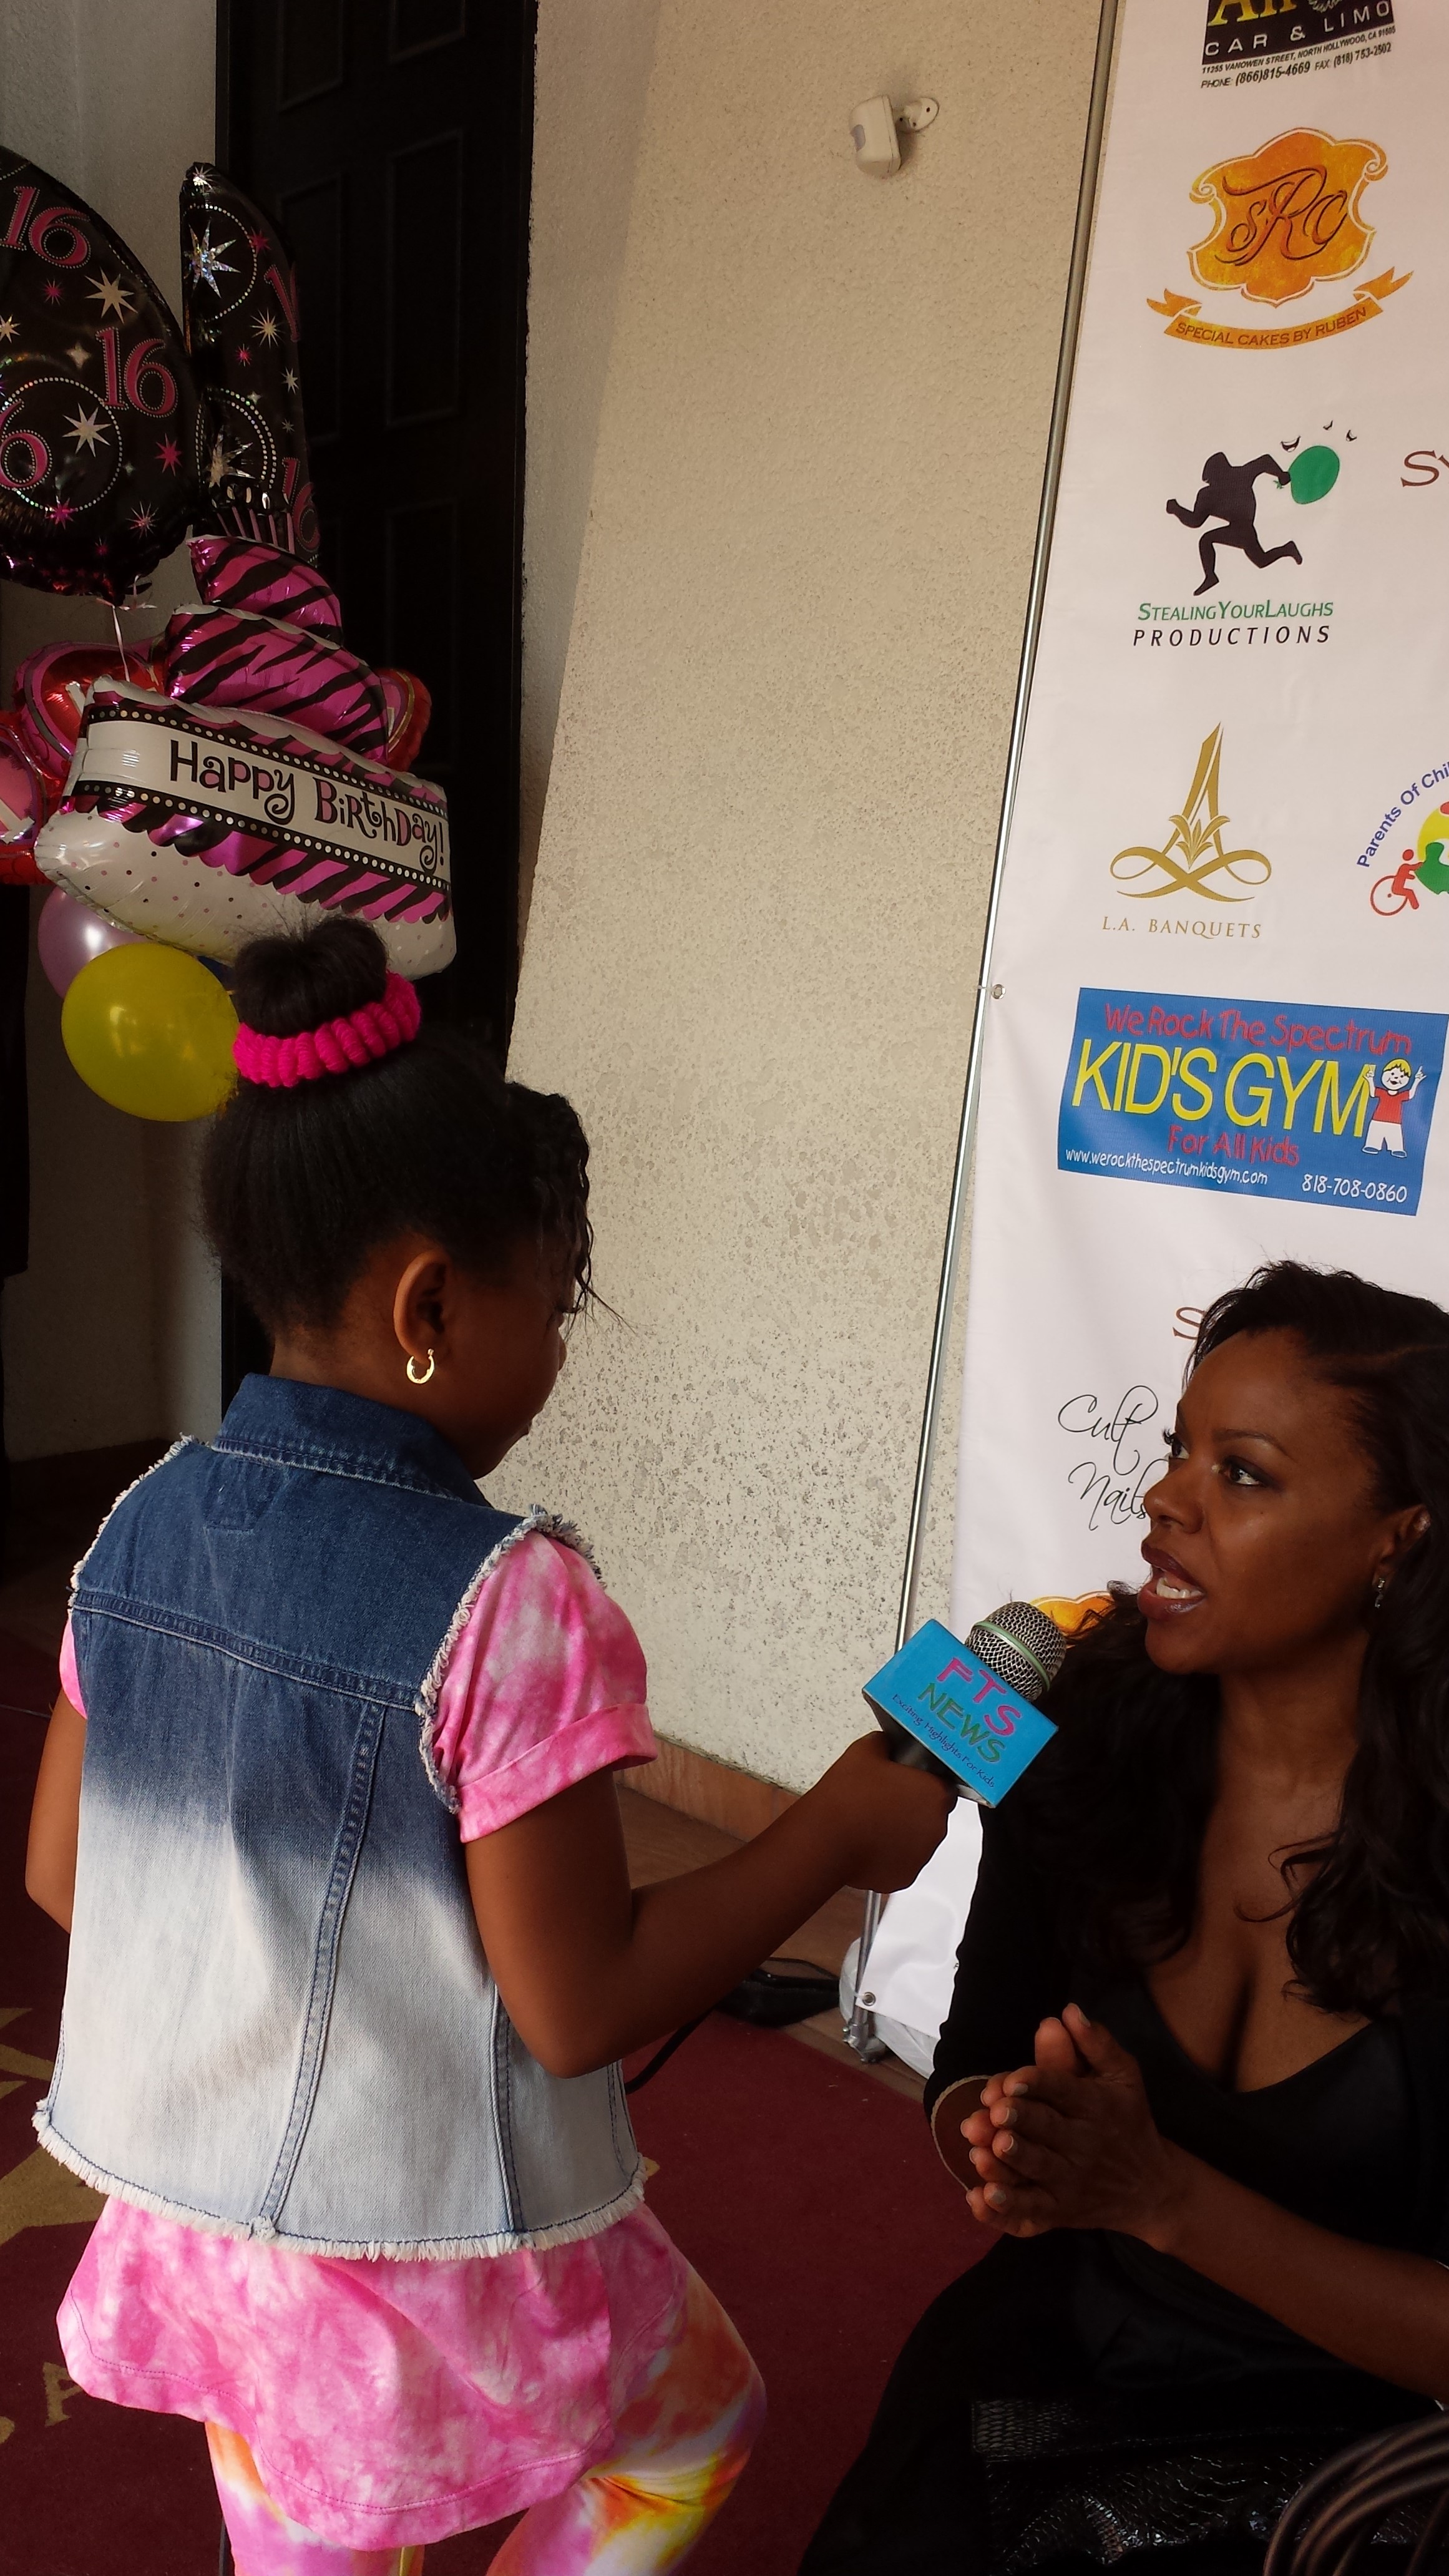 Jessica Mikayla Adams Interviewing Nadine Ellis from Lets Stay Together for FTS News